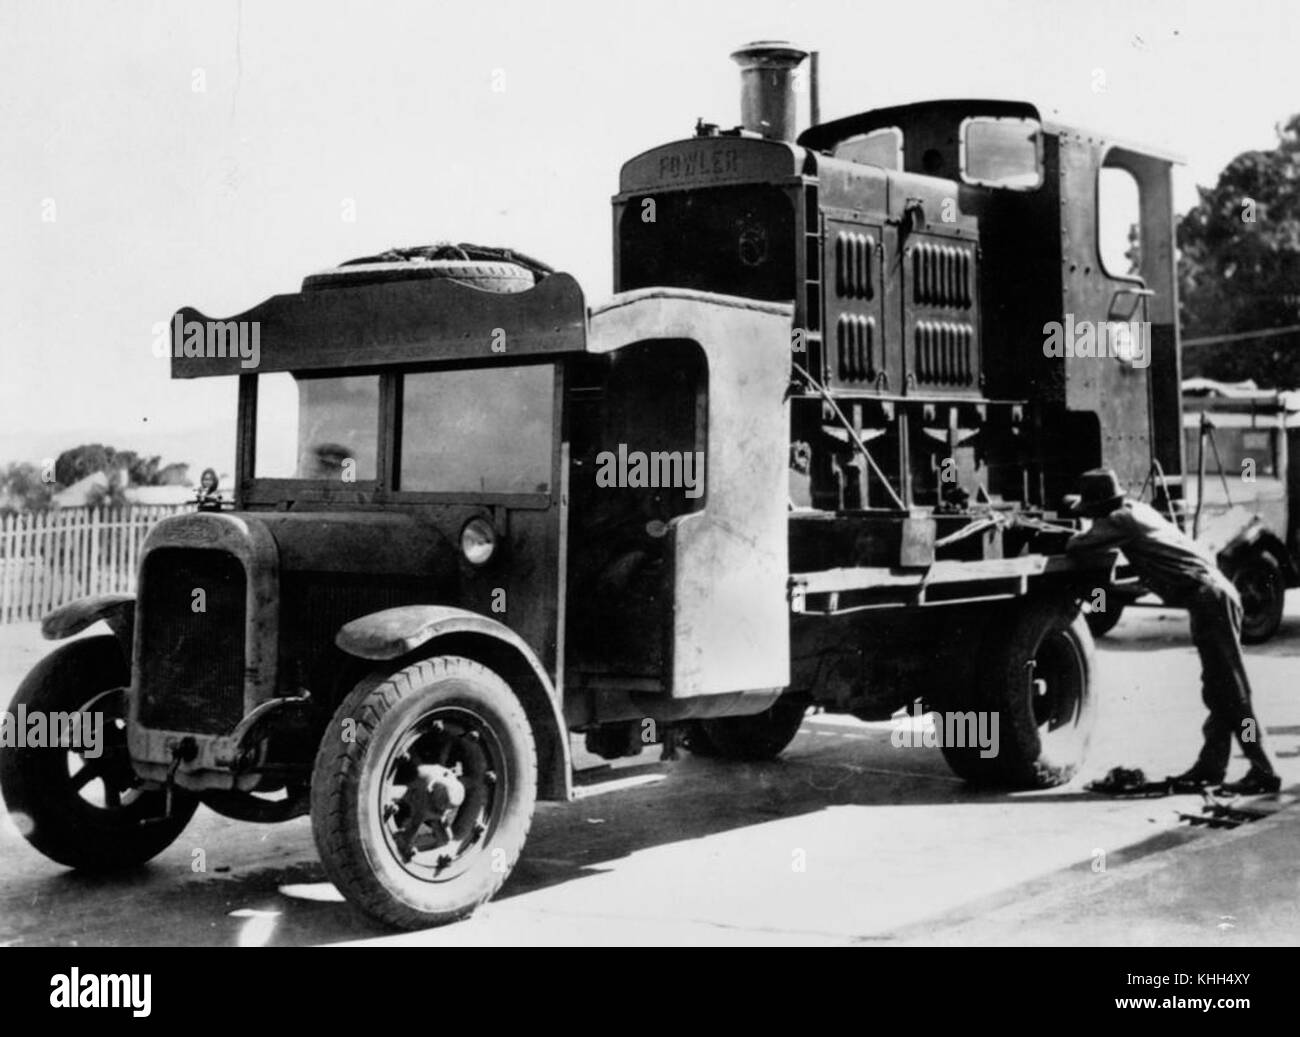 2 117804 Single rear axle Federal truck transporting a cane train, 1925 Stock Photo